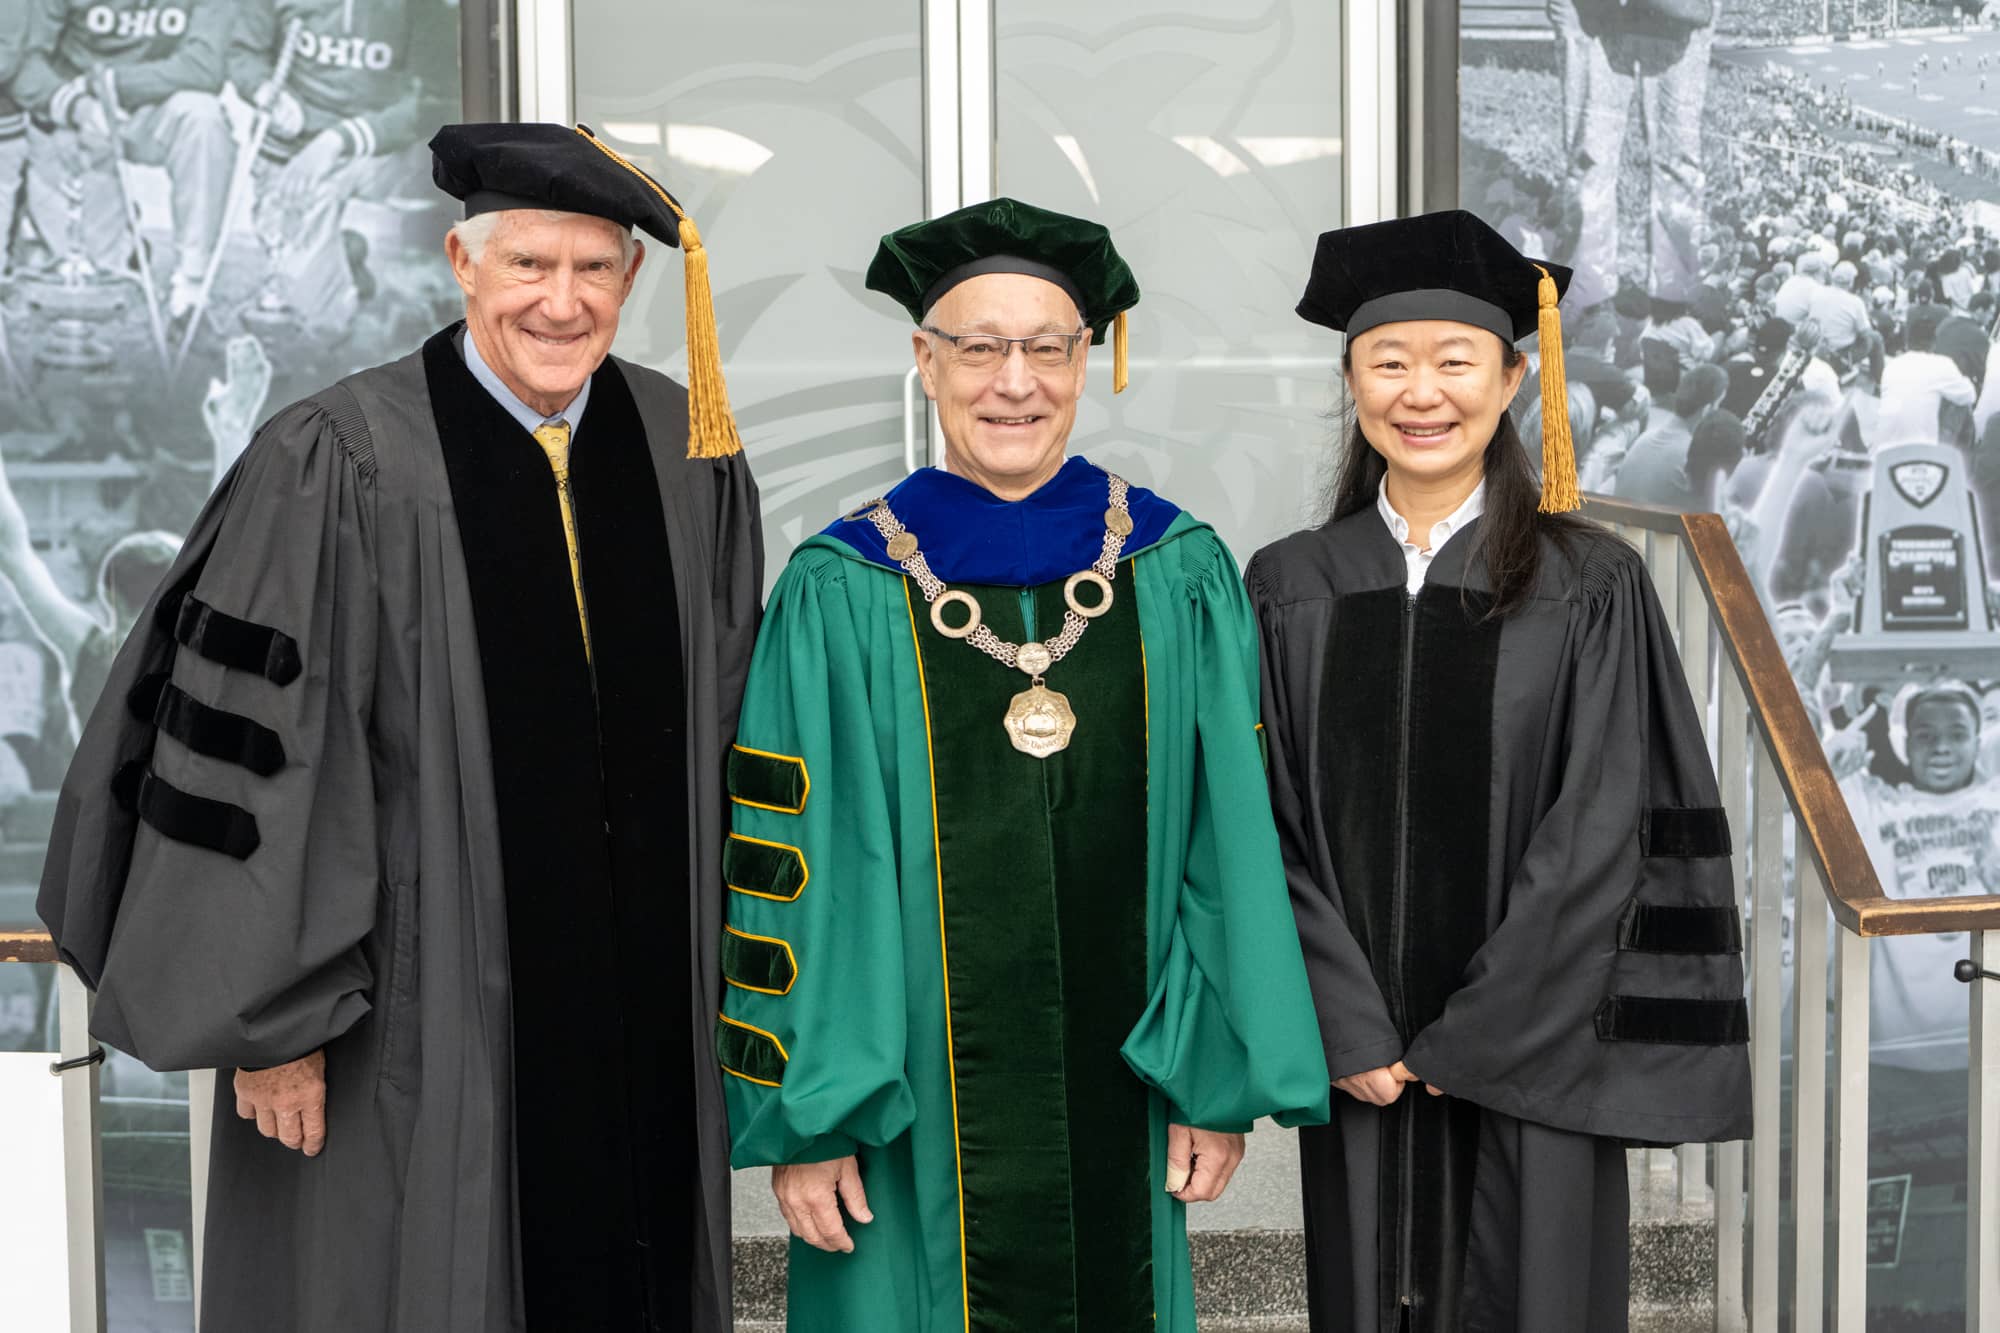 Ohio University President Hugh Sherman (Center) poses for a photo with honorary degree recipients John Roush (Left) and Jue Chen prior to graduate commencement ceremonies.